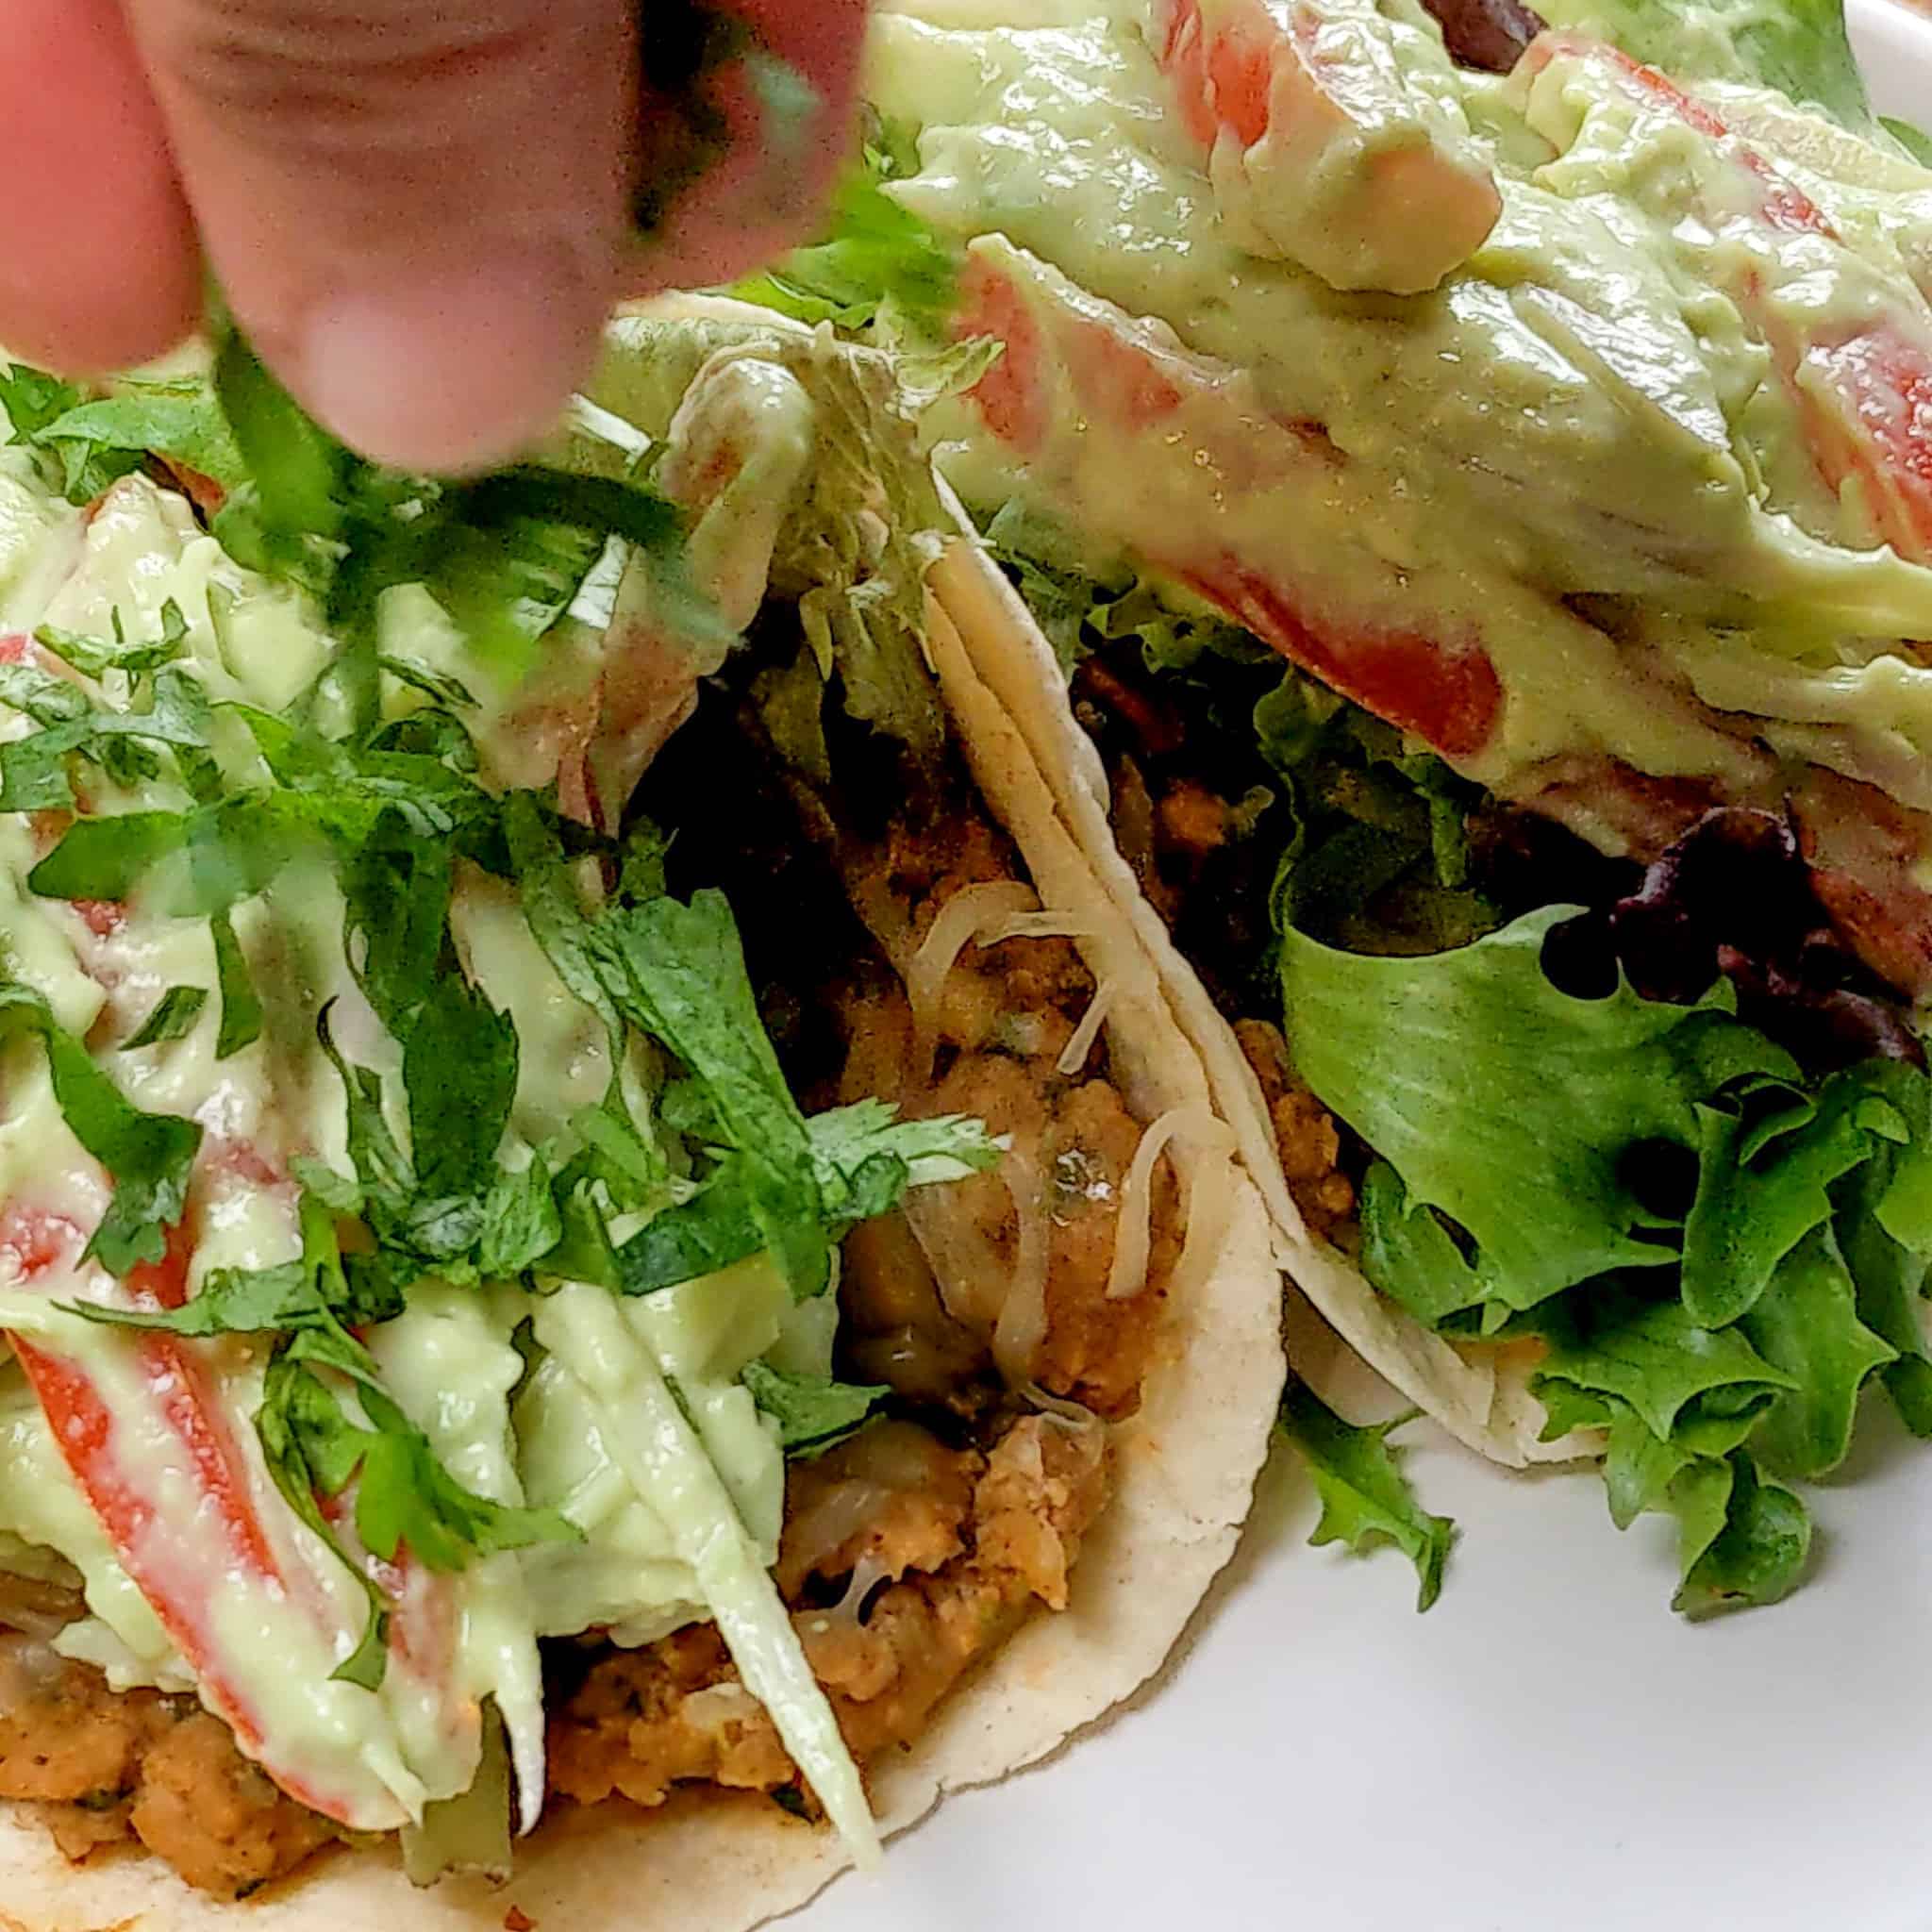 up-close shot of the Salsa Verde Turkey and Beans Tacos with Avocado Cream being garnished with shredded cilantro leaves.